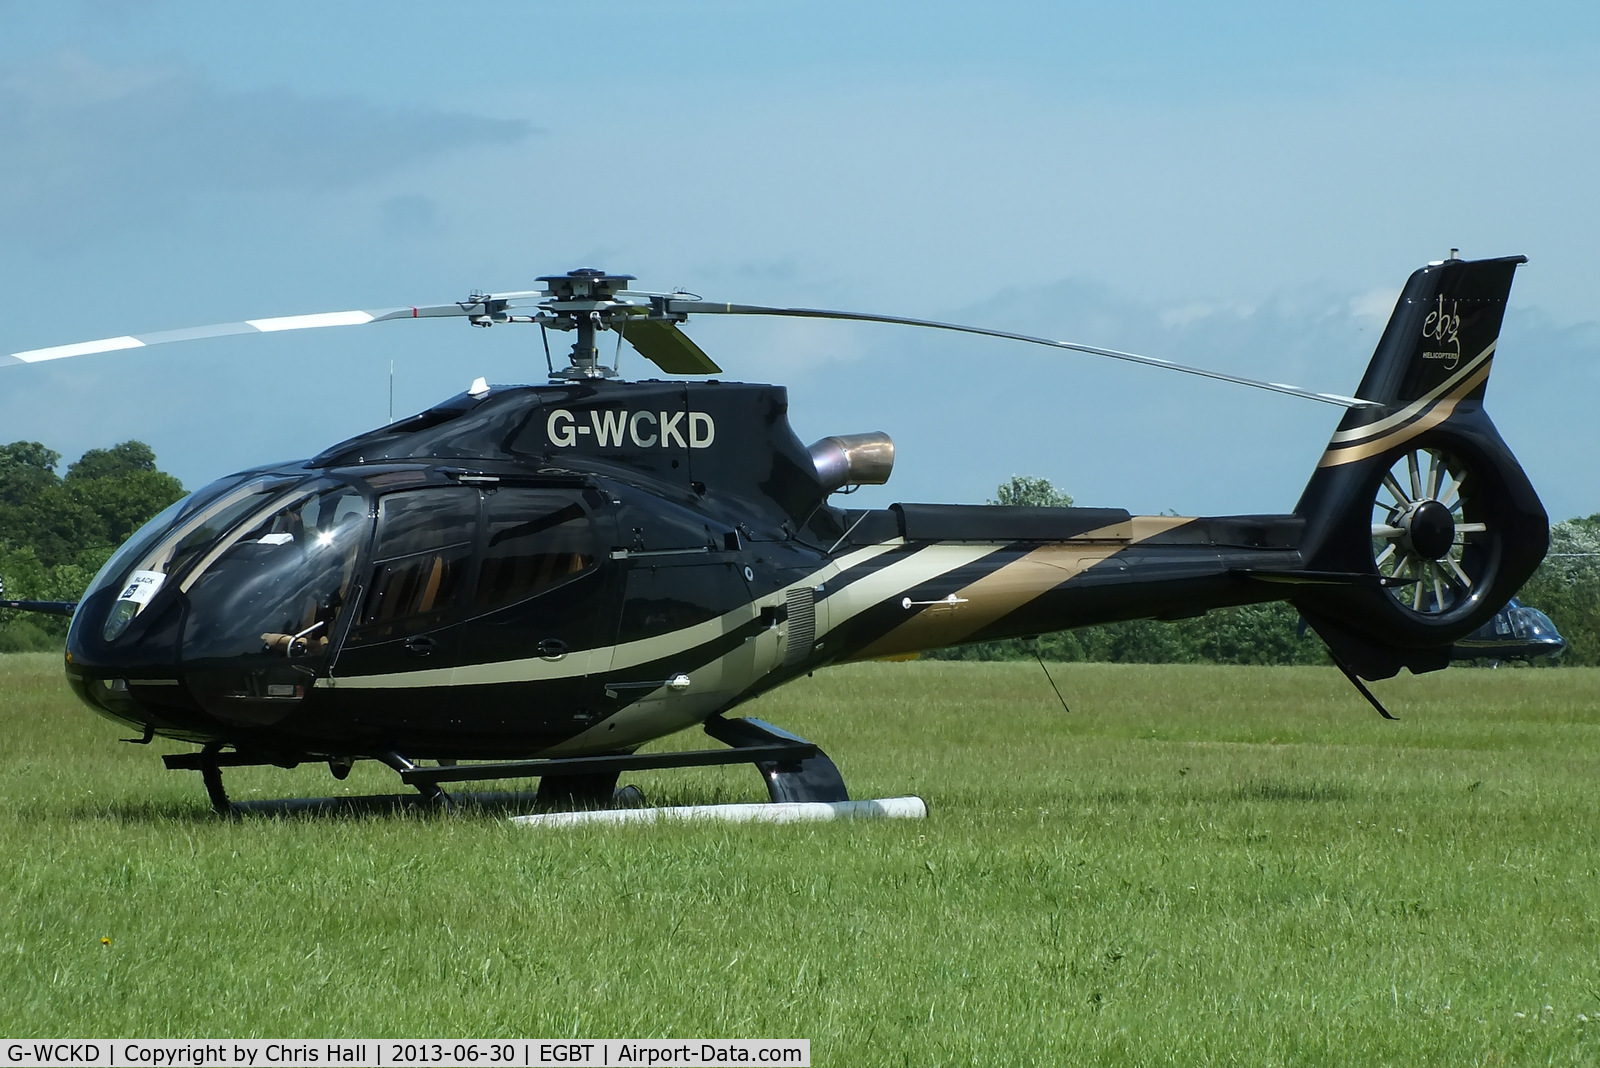 G-WCKD, 2009 Eurocopter EC-130B-4 (AS-350B-4) C/N 4746, being used for ferrying race fans to the British F1 Grand Prix at Silverstone